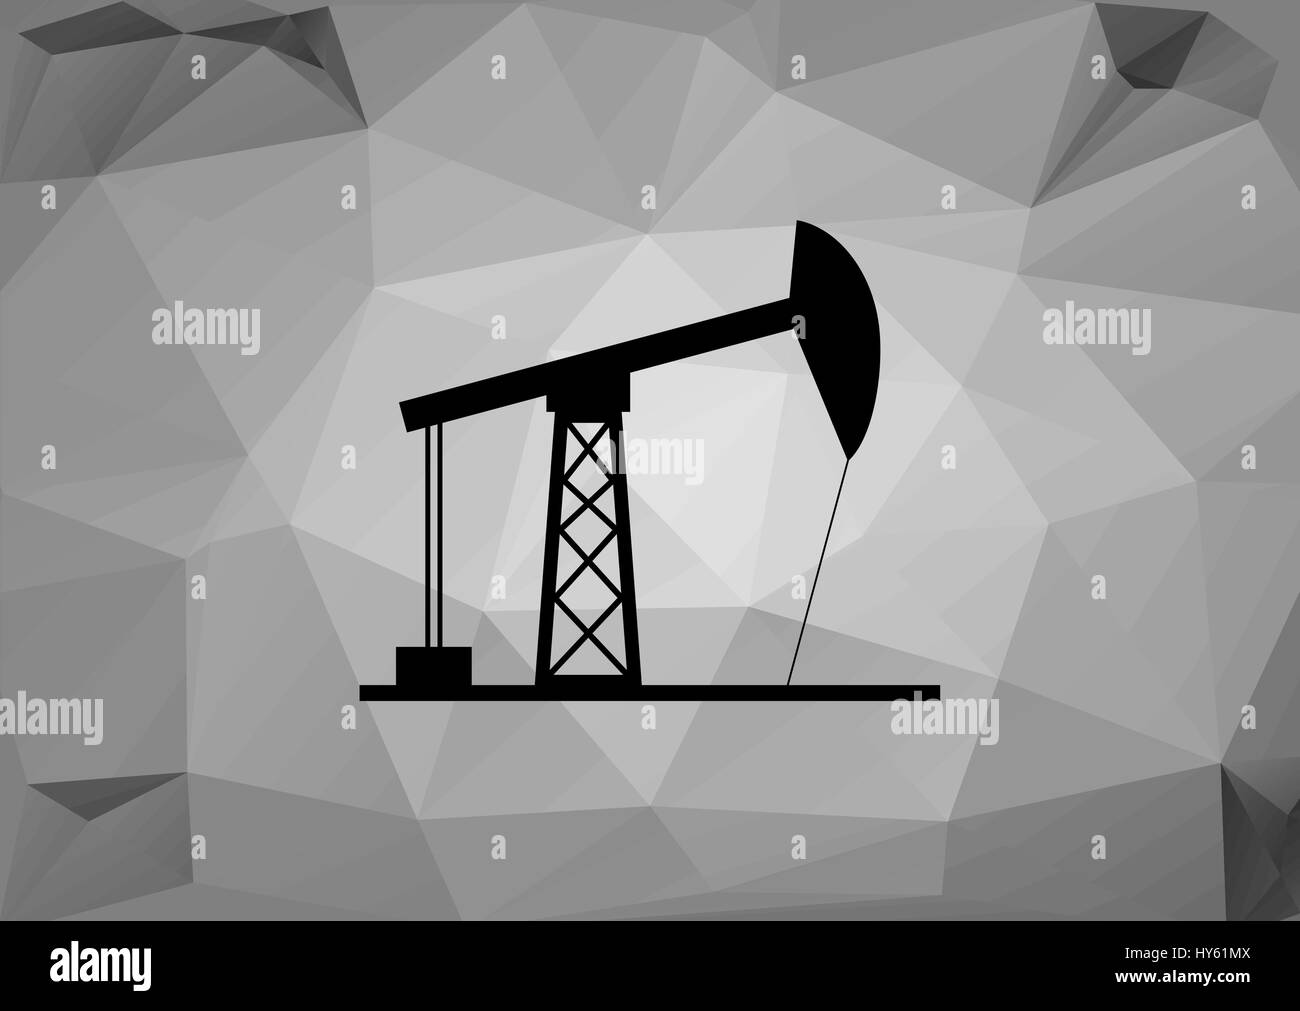 Oil pump on the low poly background. Oil industry, fossil energy, fossil fuels, concept. Drilling rig silhouette. Oil rig icon. Vector illustration Stock Vector